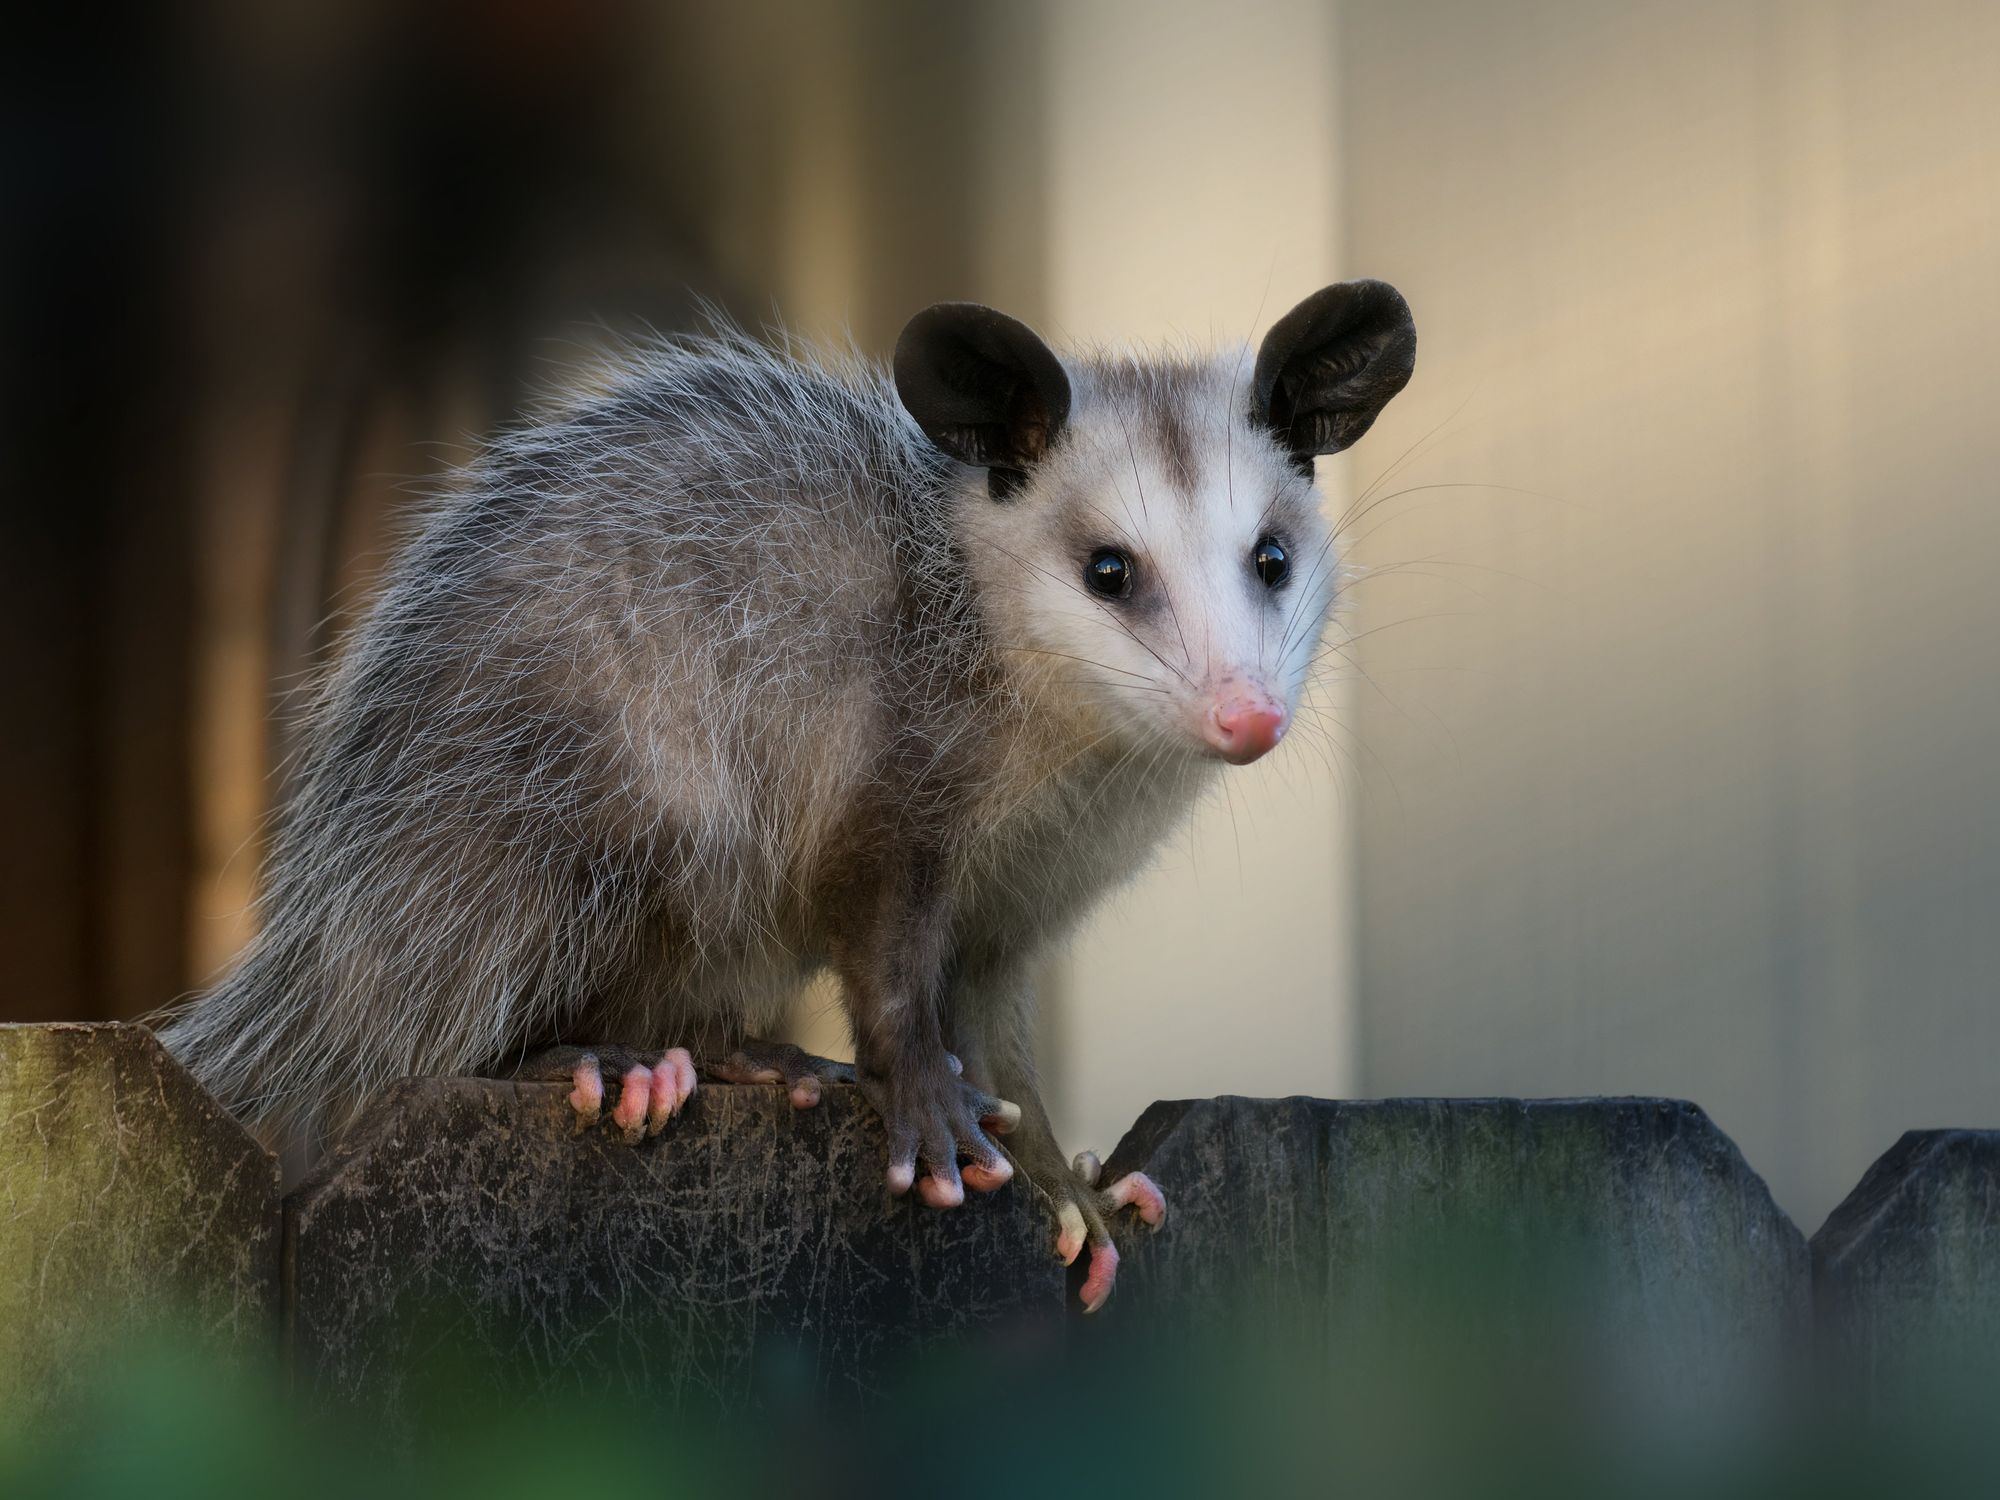 A Possum Sitting On A Wooden Fence